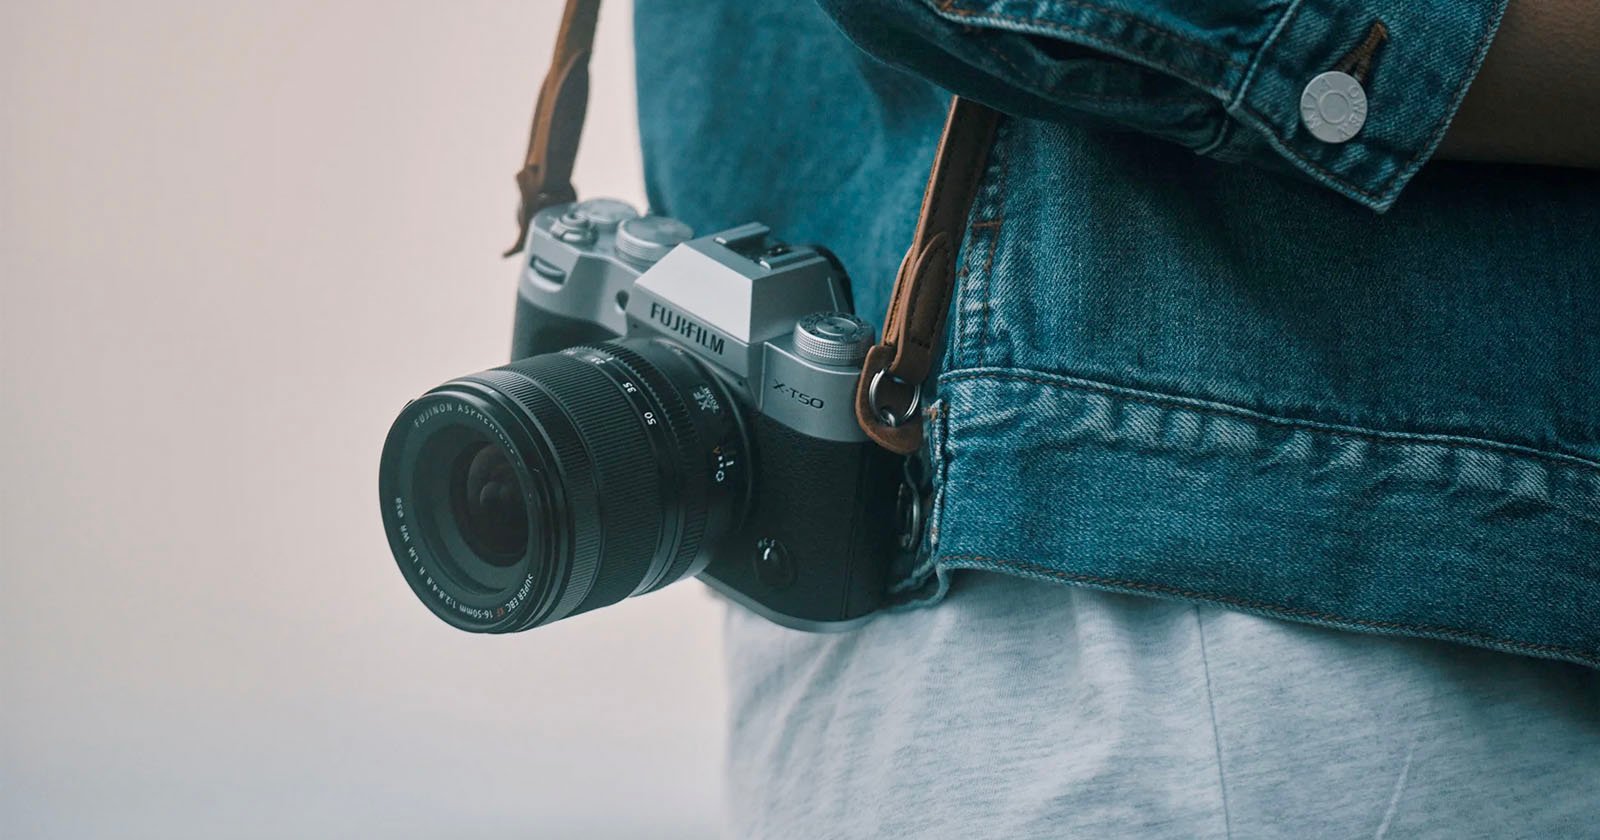 A person wearing a denim jacket has a Fujifilm XT20 camera hanging around their neck. The camera is silver and black with a lens attached, and it is secured by a brown strap. The background is blurred, focusing attention on the camera and the jacket.